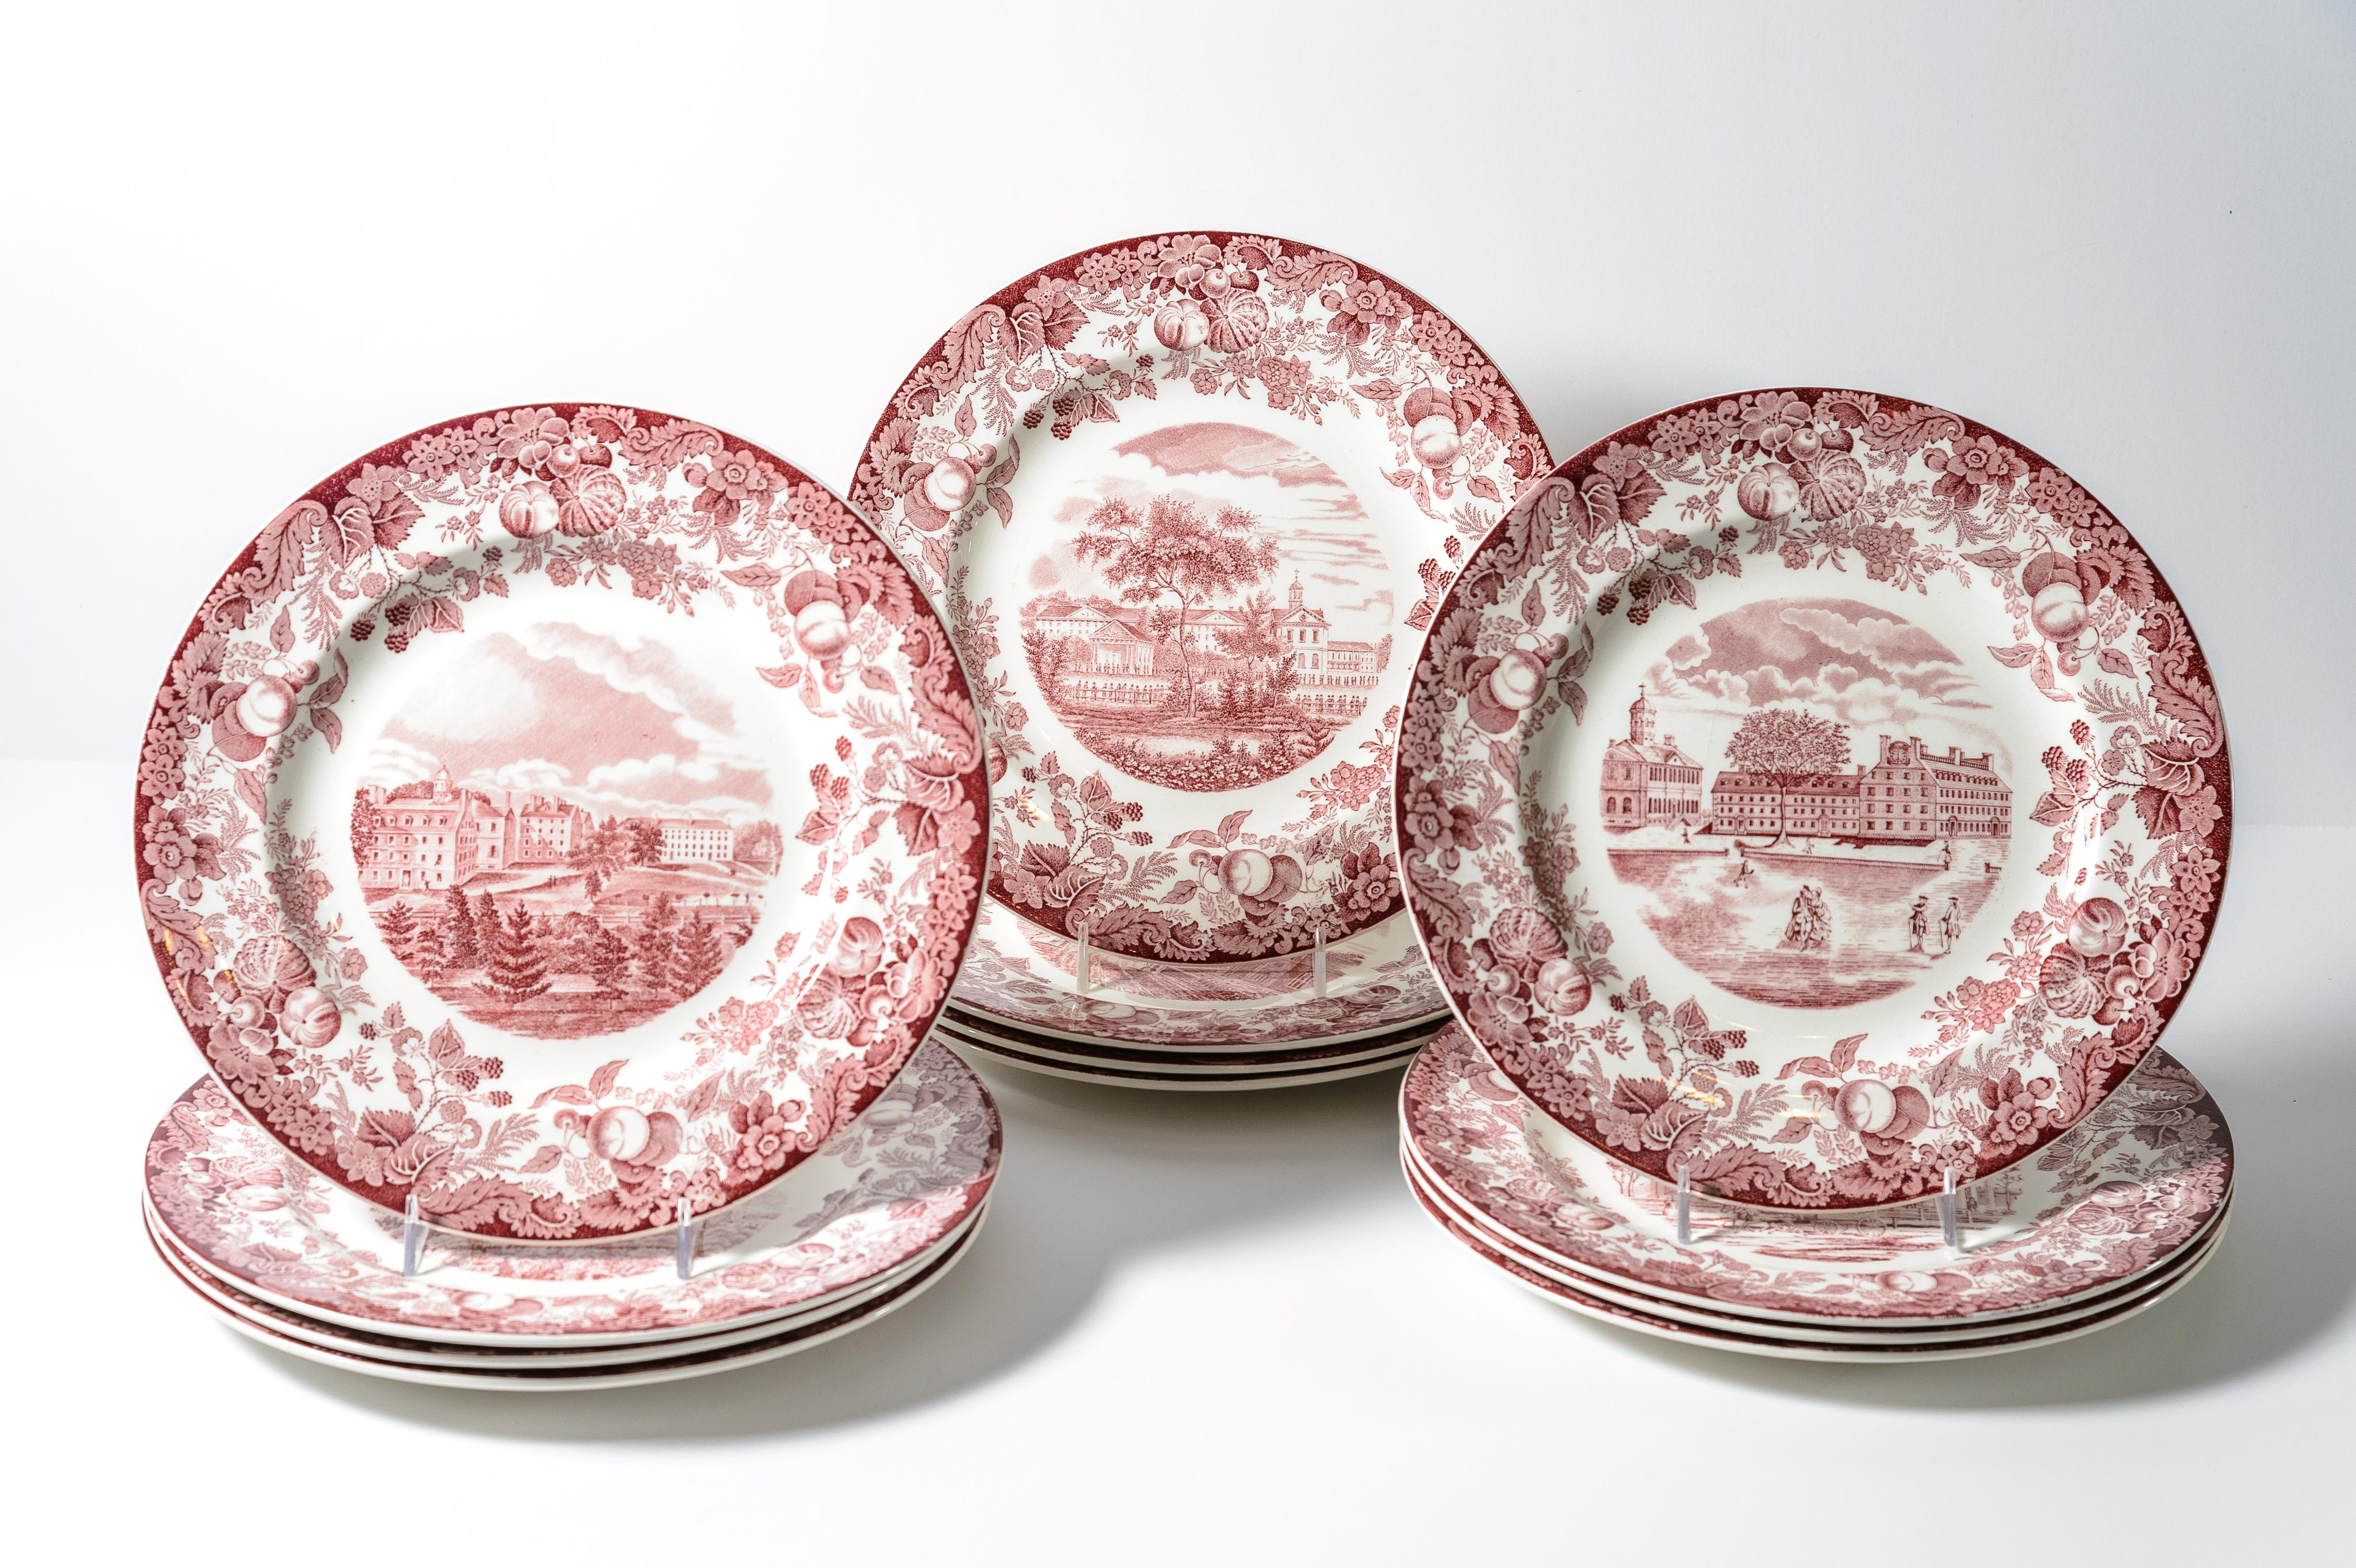 A set of 12 dinner plates of Harvard University in their signature red color. These were meticulously produced by Wedgwood England and shows crisp detail throughout. They are in very good vintage condition and listed below are the scenes they